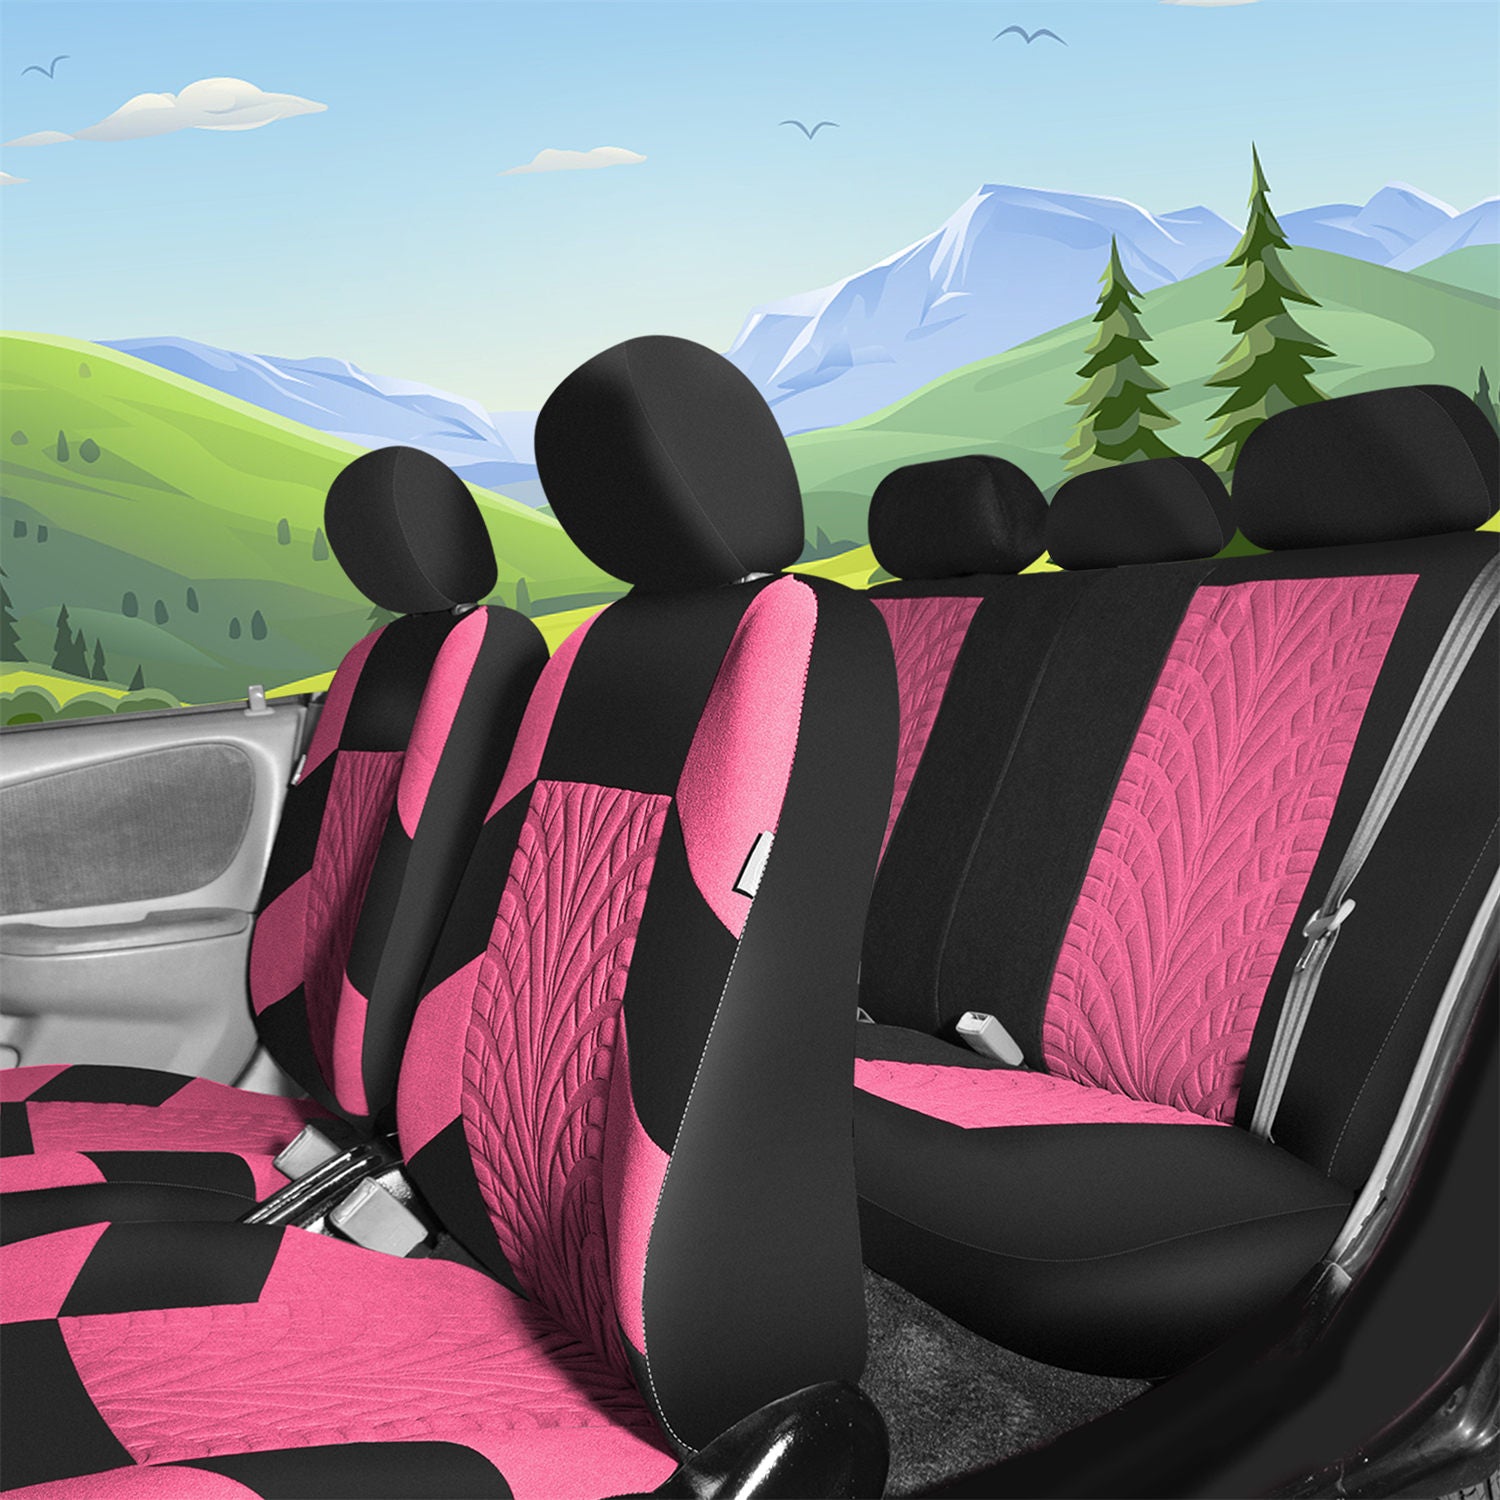 Travel Master Seat Covers - Full Set Pink